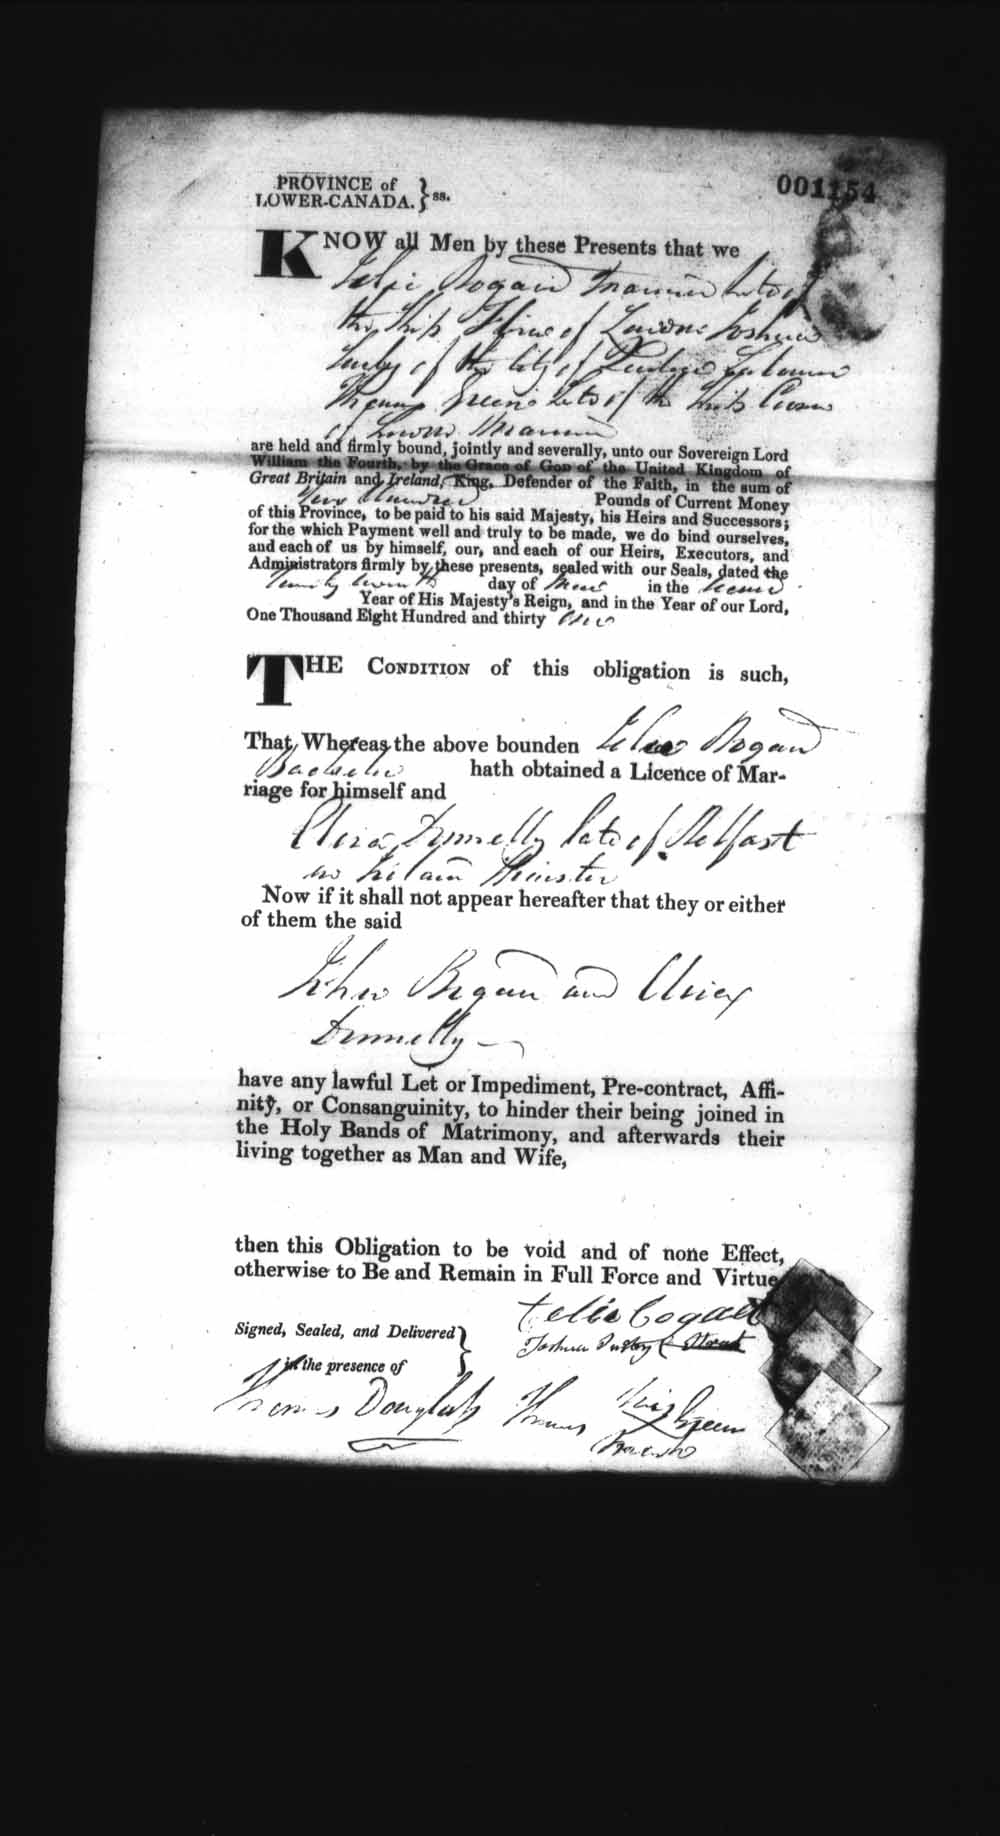 Digitized page of Upper and Lower Canada Marriage Bonds (1779-1865) for Image No.: e008237305